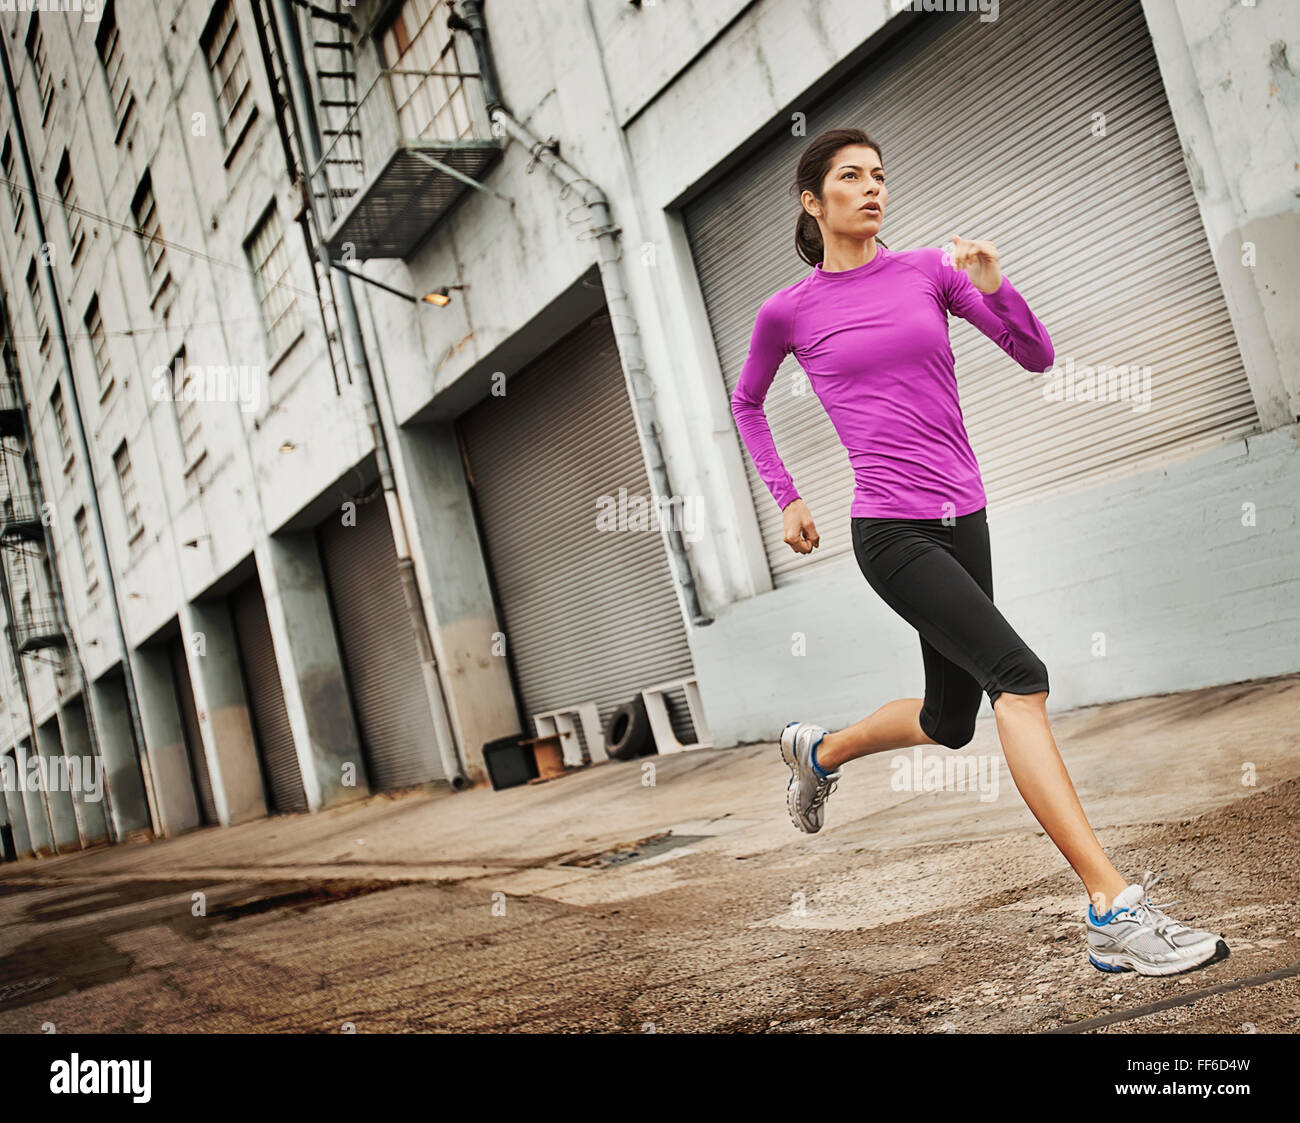 A woman running along an urban road with her arms working, stretching her legs. Stock Photo